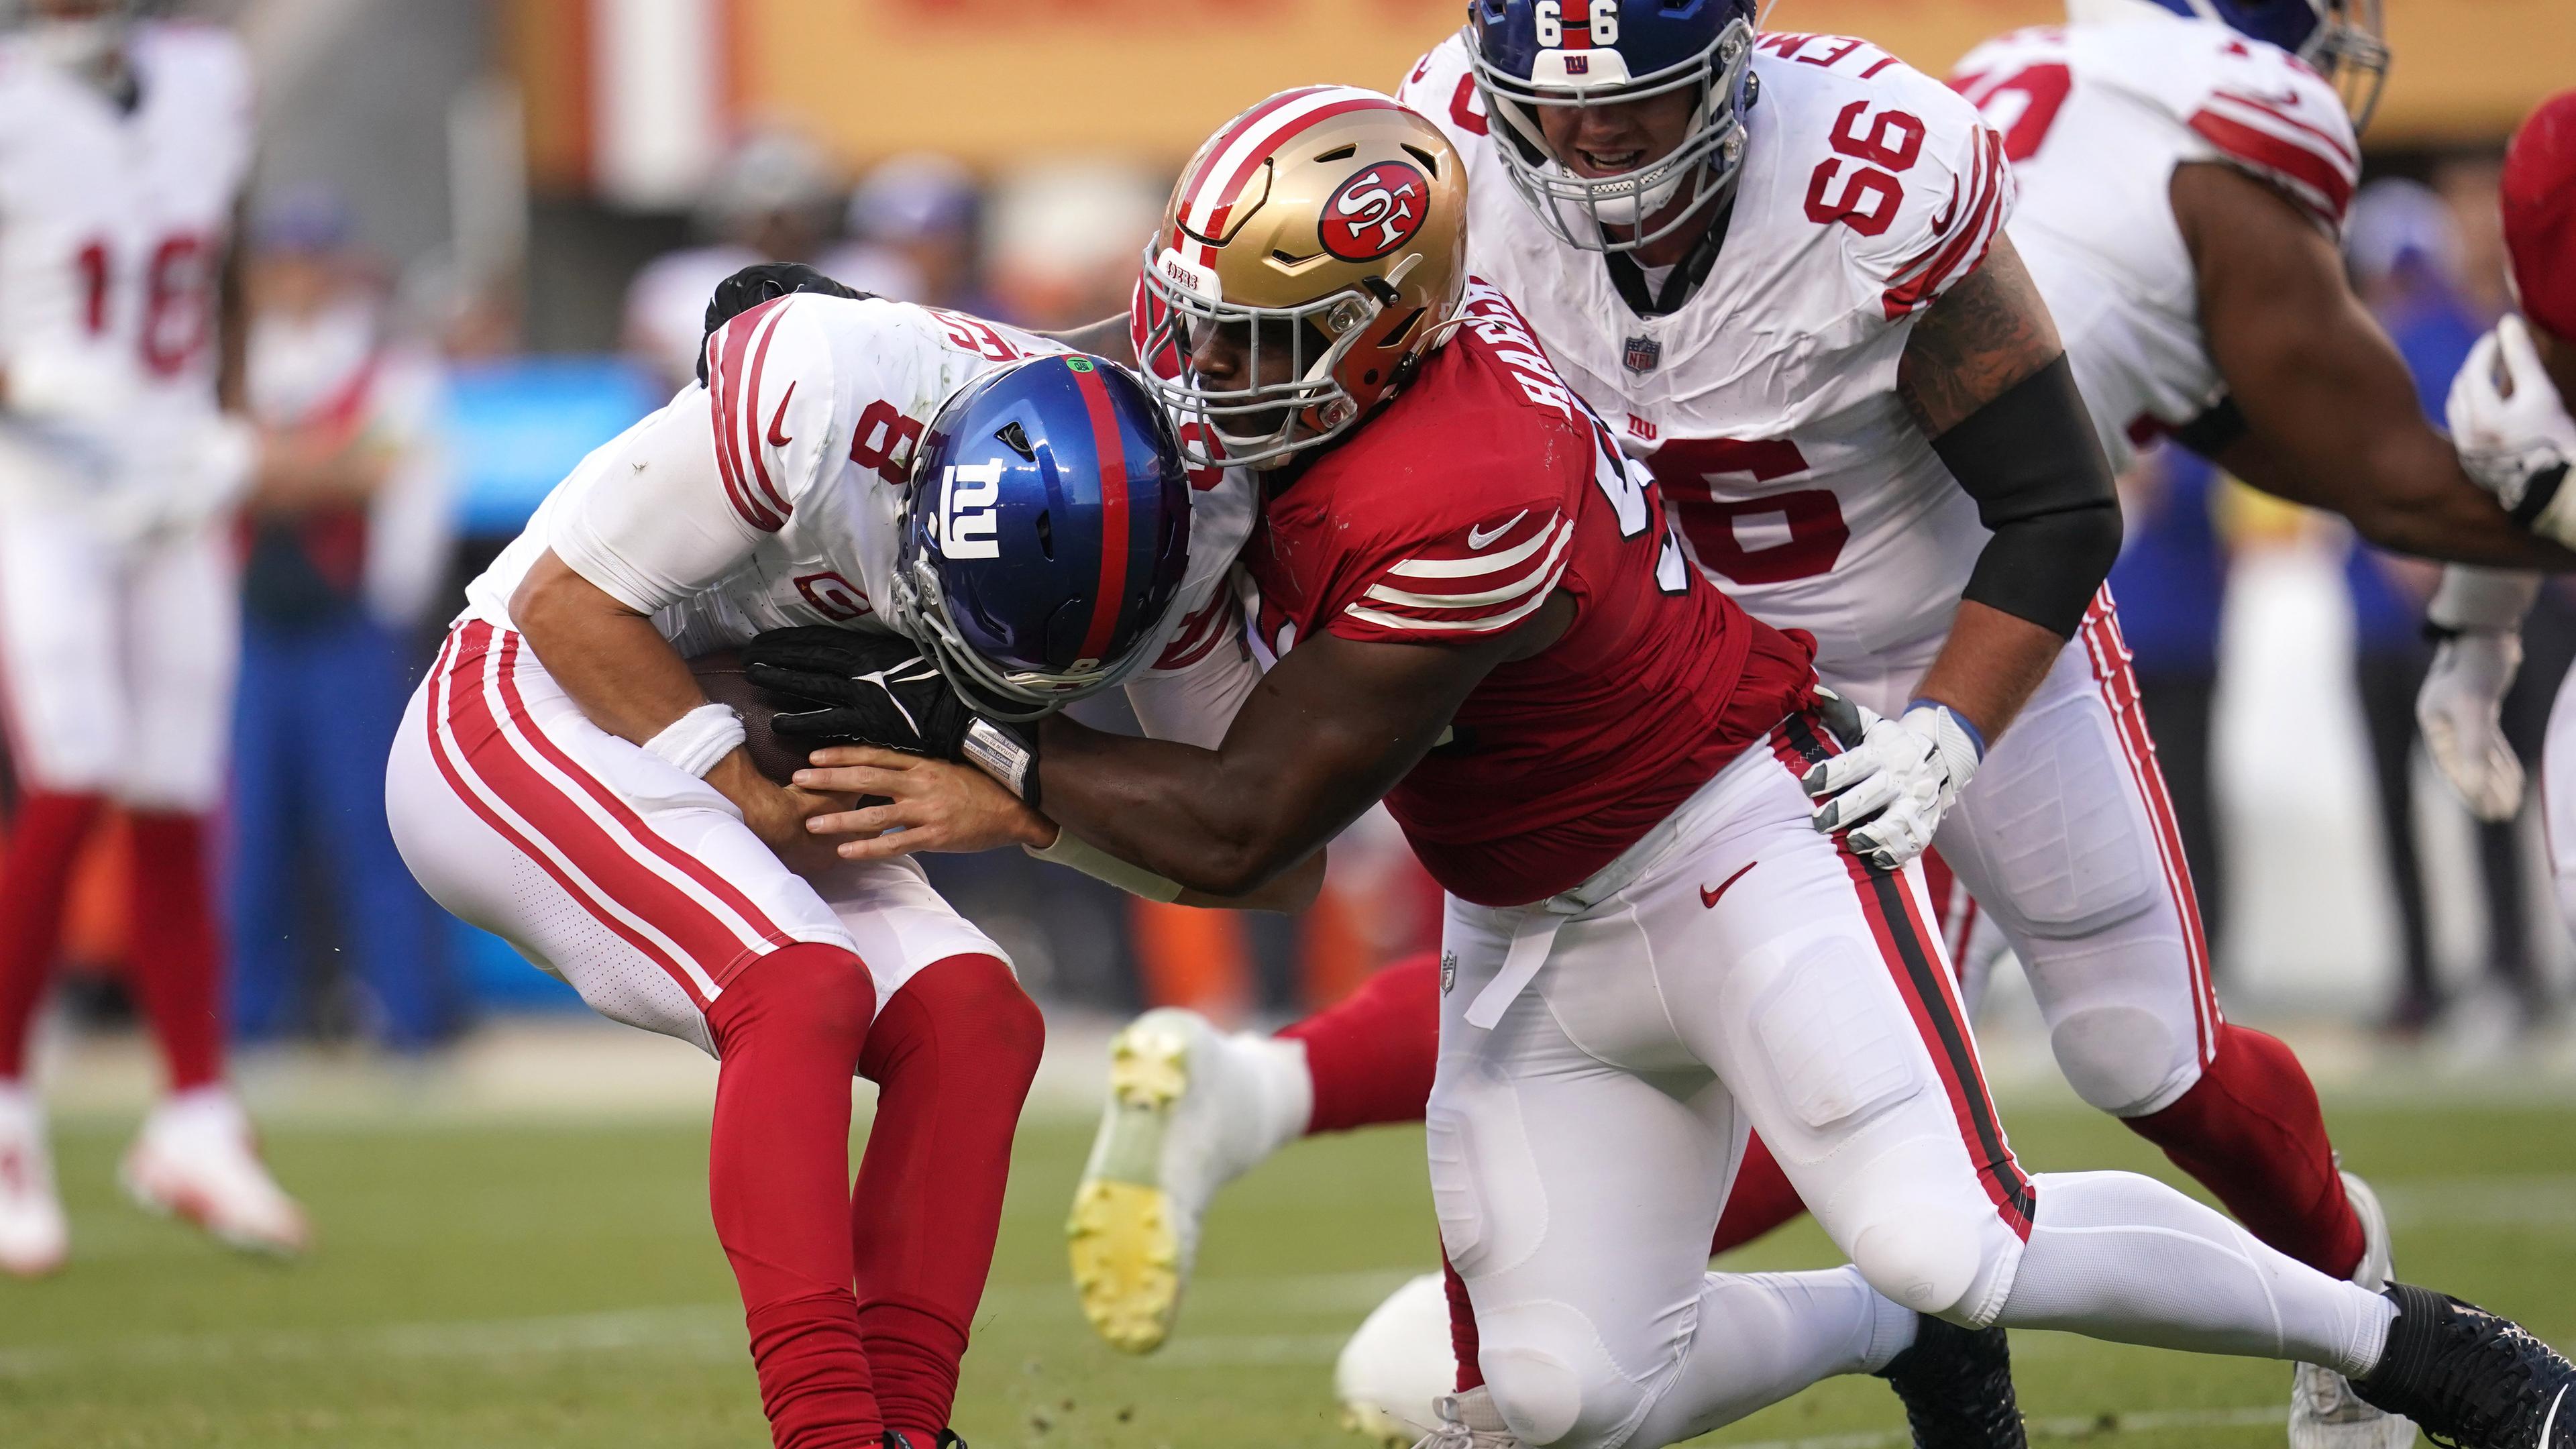 New York Giants quarterback Daniel Jones (8) is sacked by San Francisco 49ers defensive tackle Javon Hargrave (98) in the second quarter at Levi's Stadium. / Cary Edmondson-USA TODAY Sports